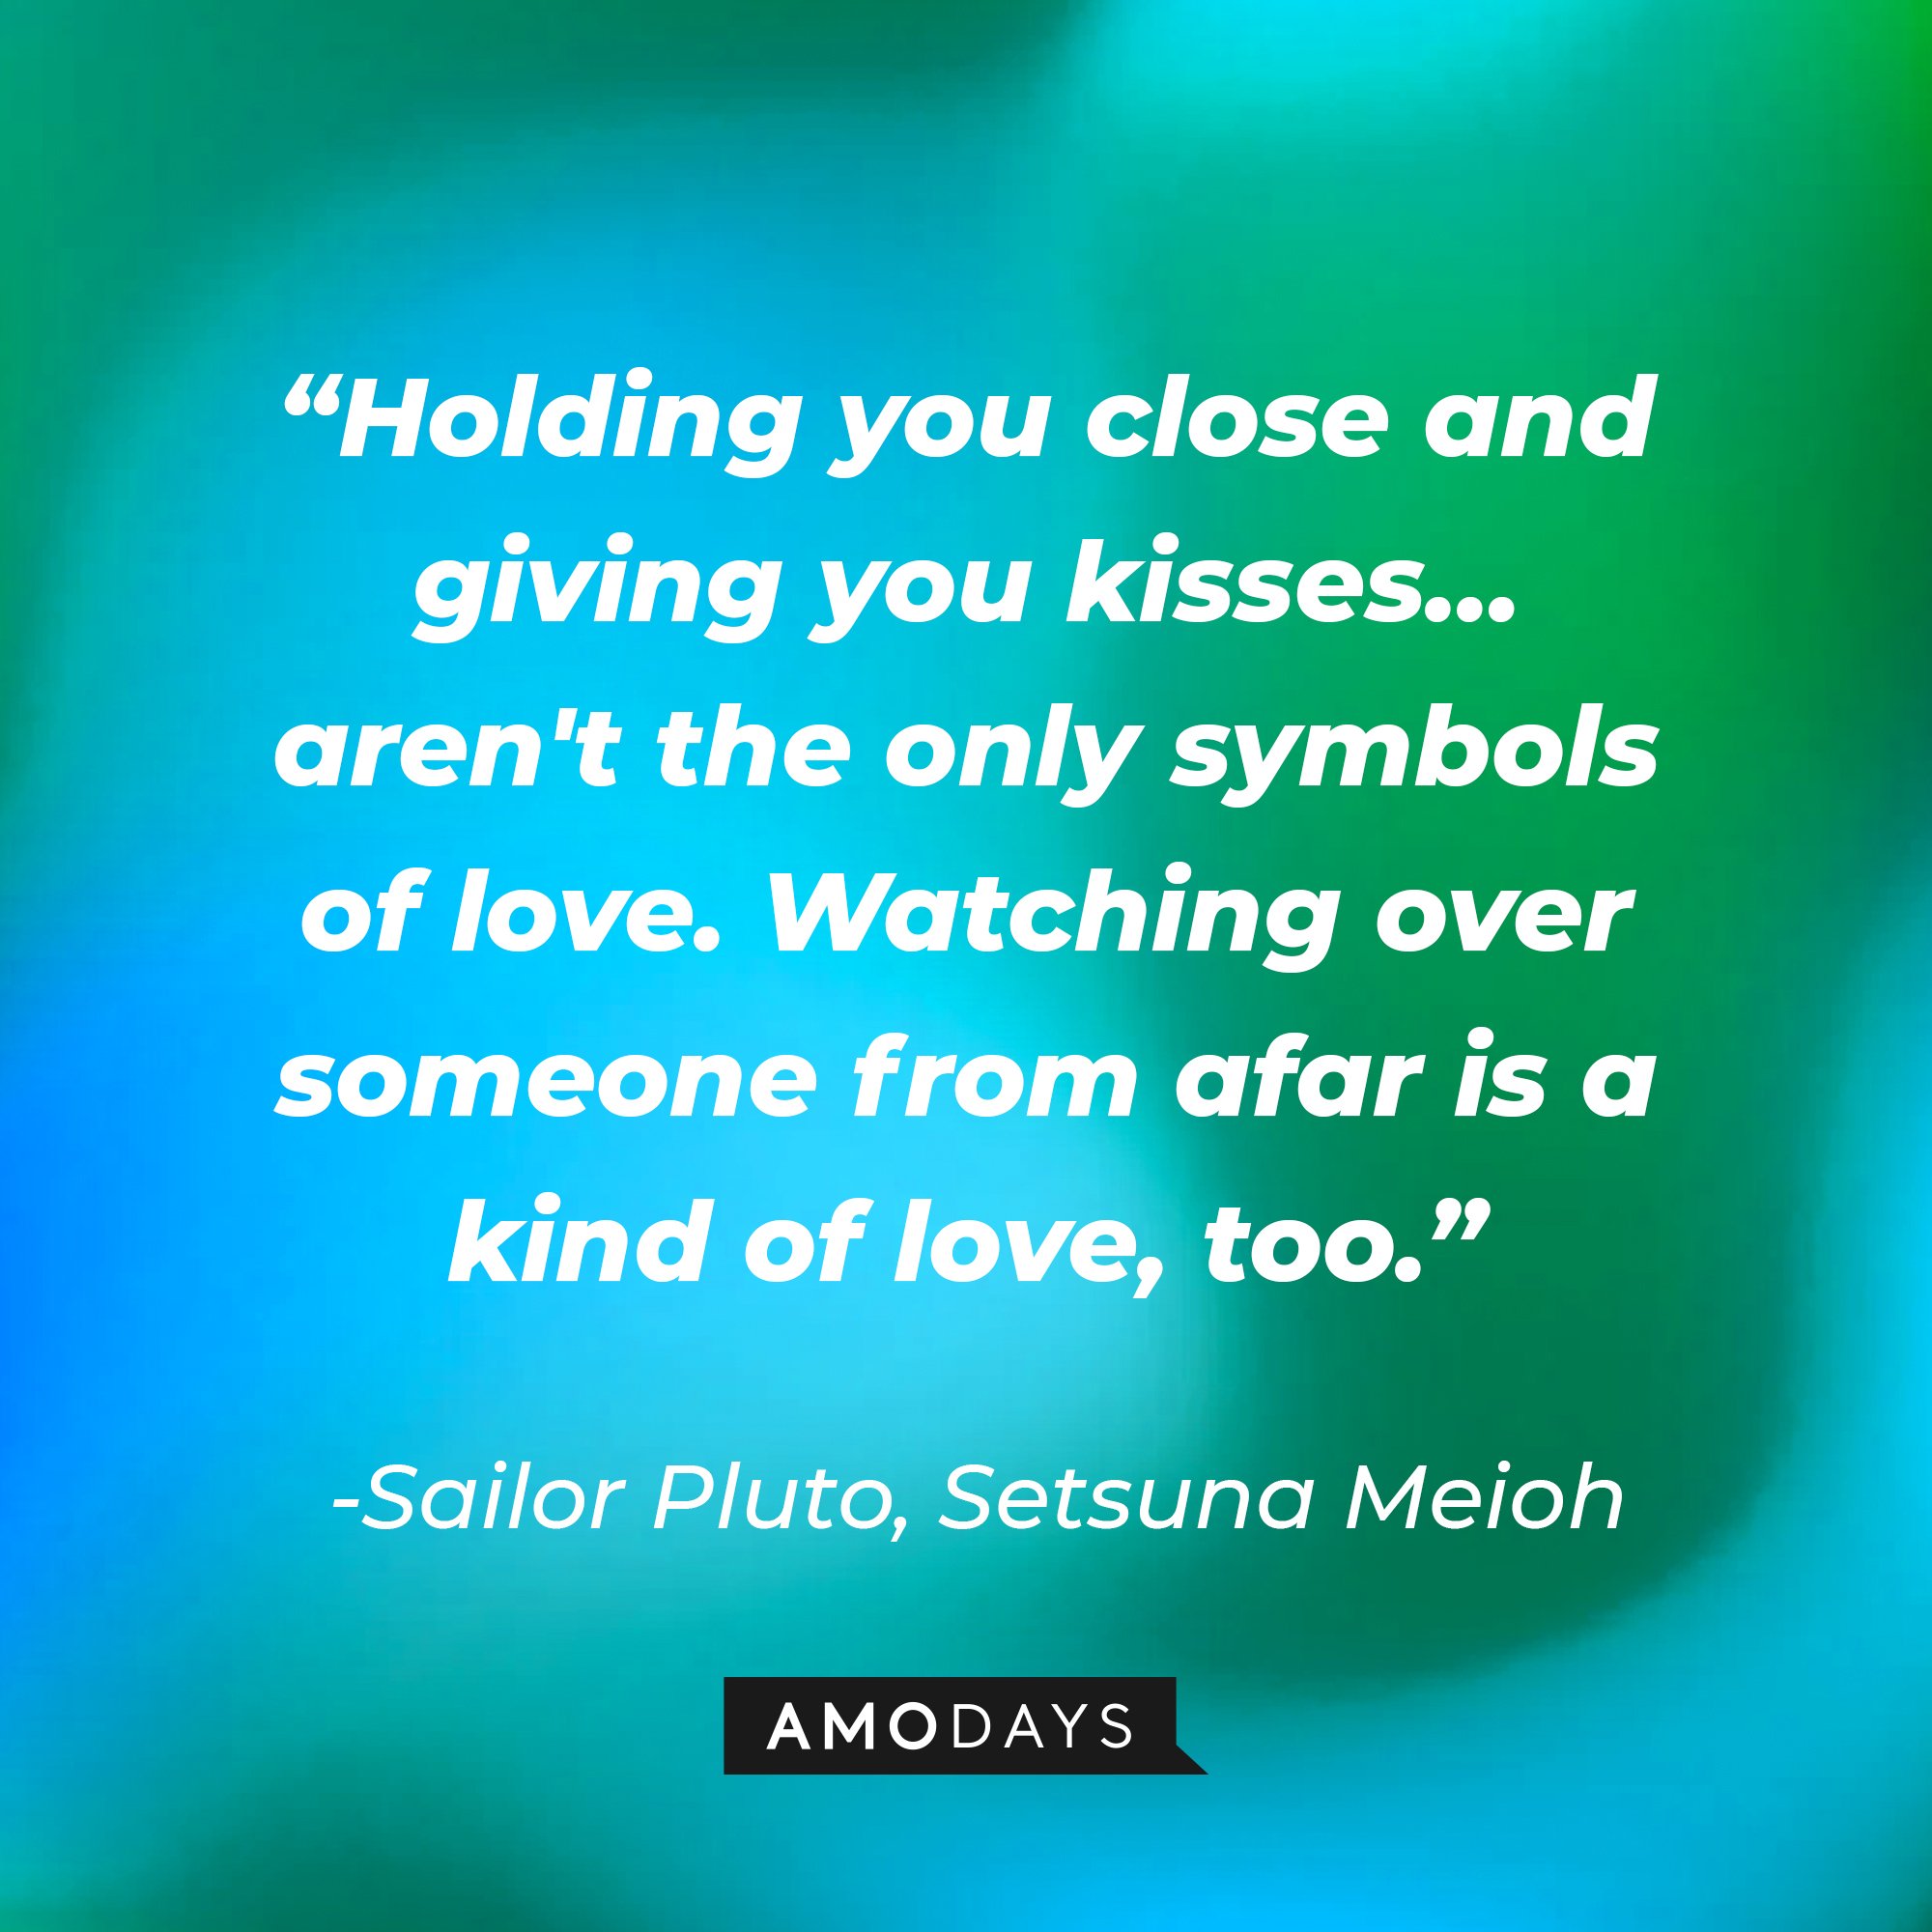 “Sailor Pluto/Setsuna Meioh’s quote: Holding you close and giving you kisses… aren't the only symbols of love. Watching over someone from afar is a kind of love, too." | Image: AmoDays